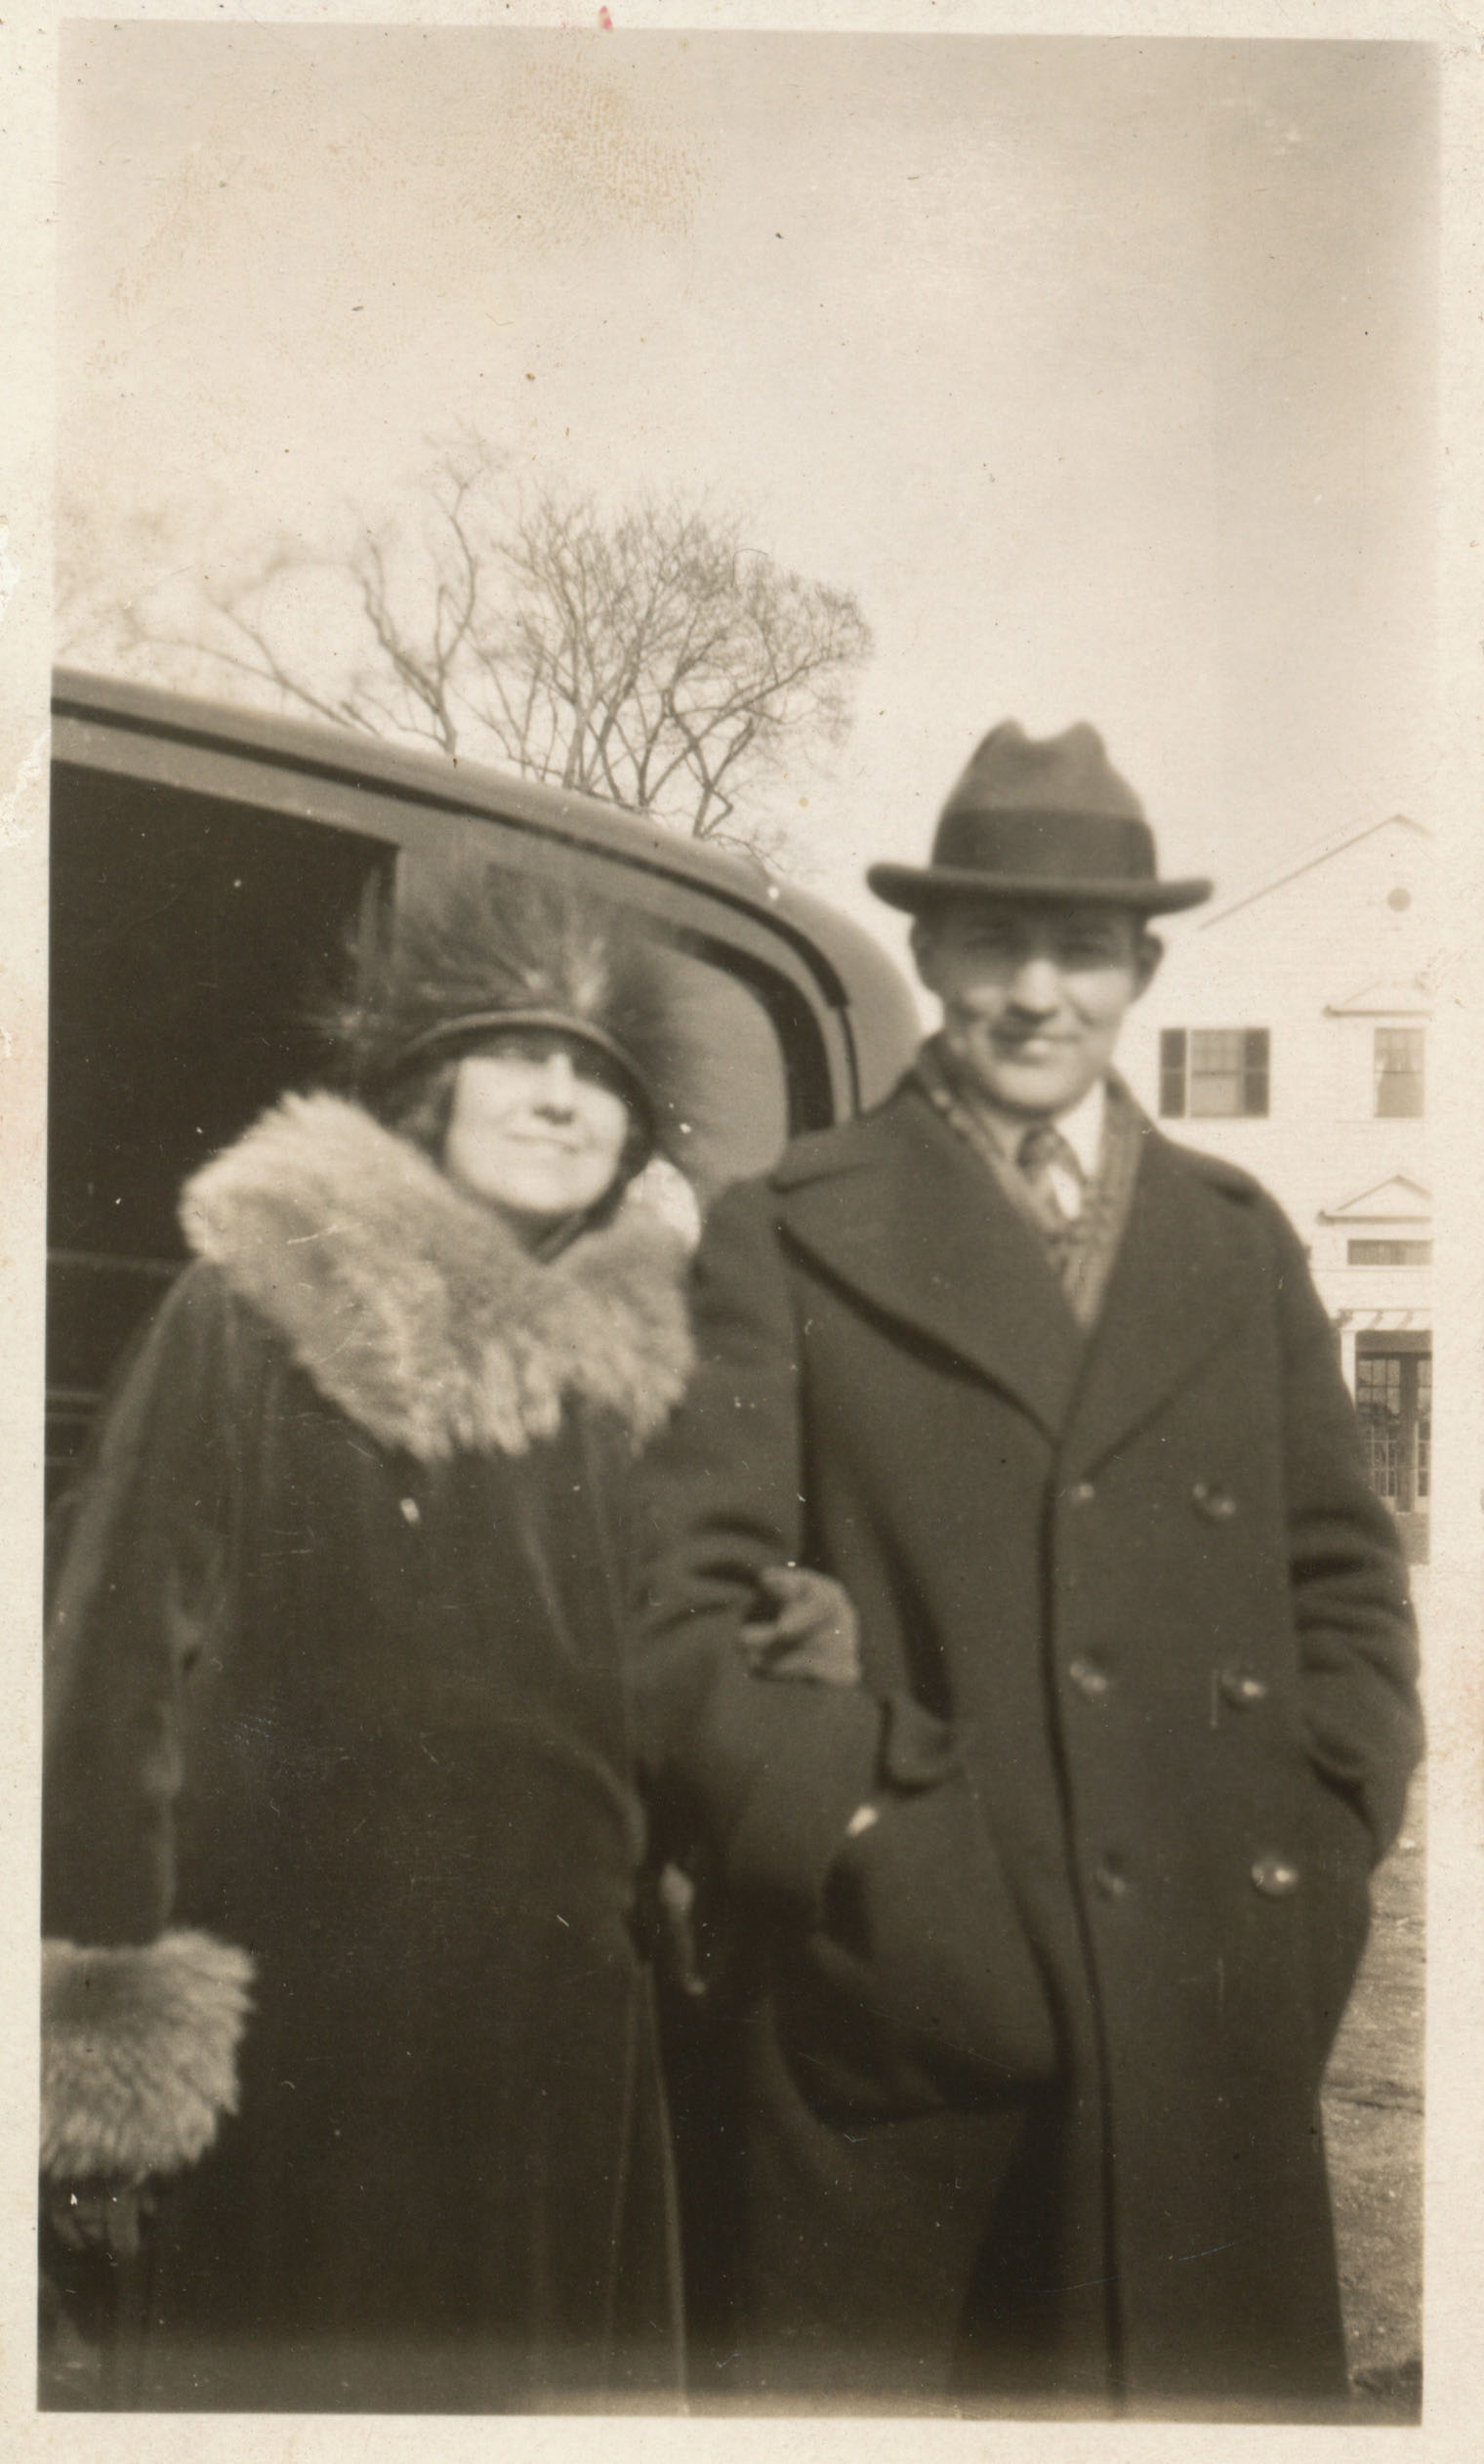 Edith and Philip wearing coats